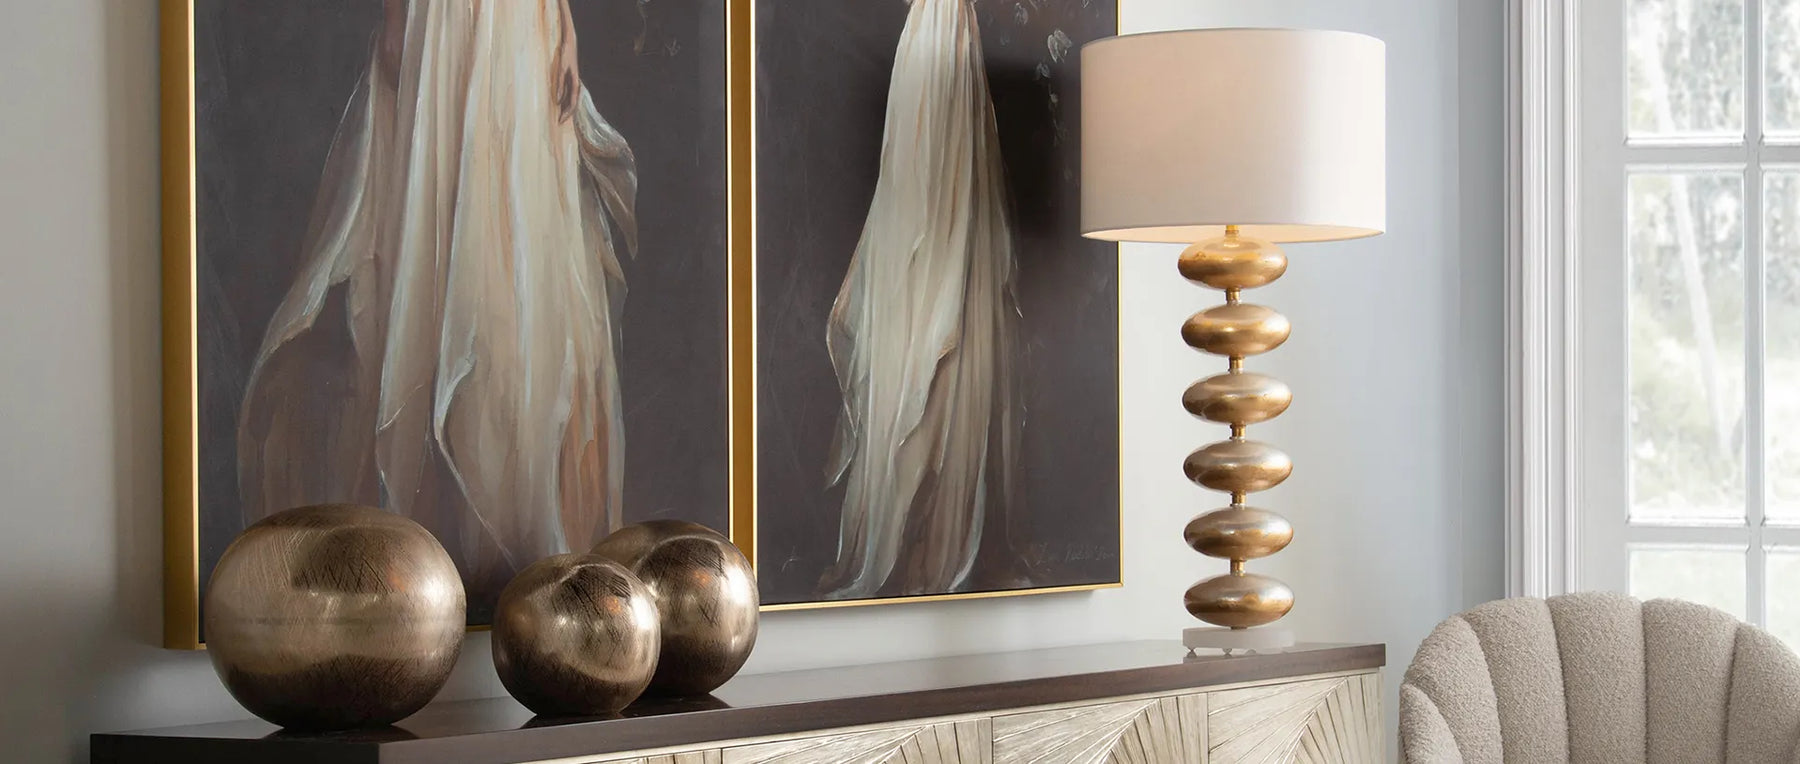 Discover the Art of Luxurious Living with John-Richard Home Decor